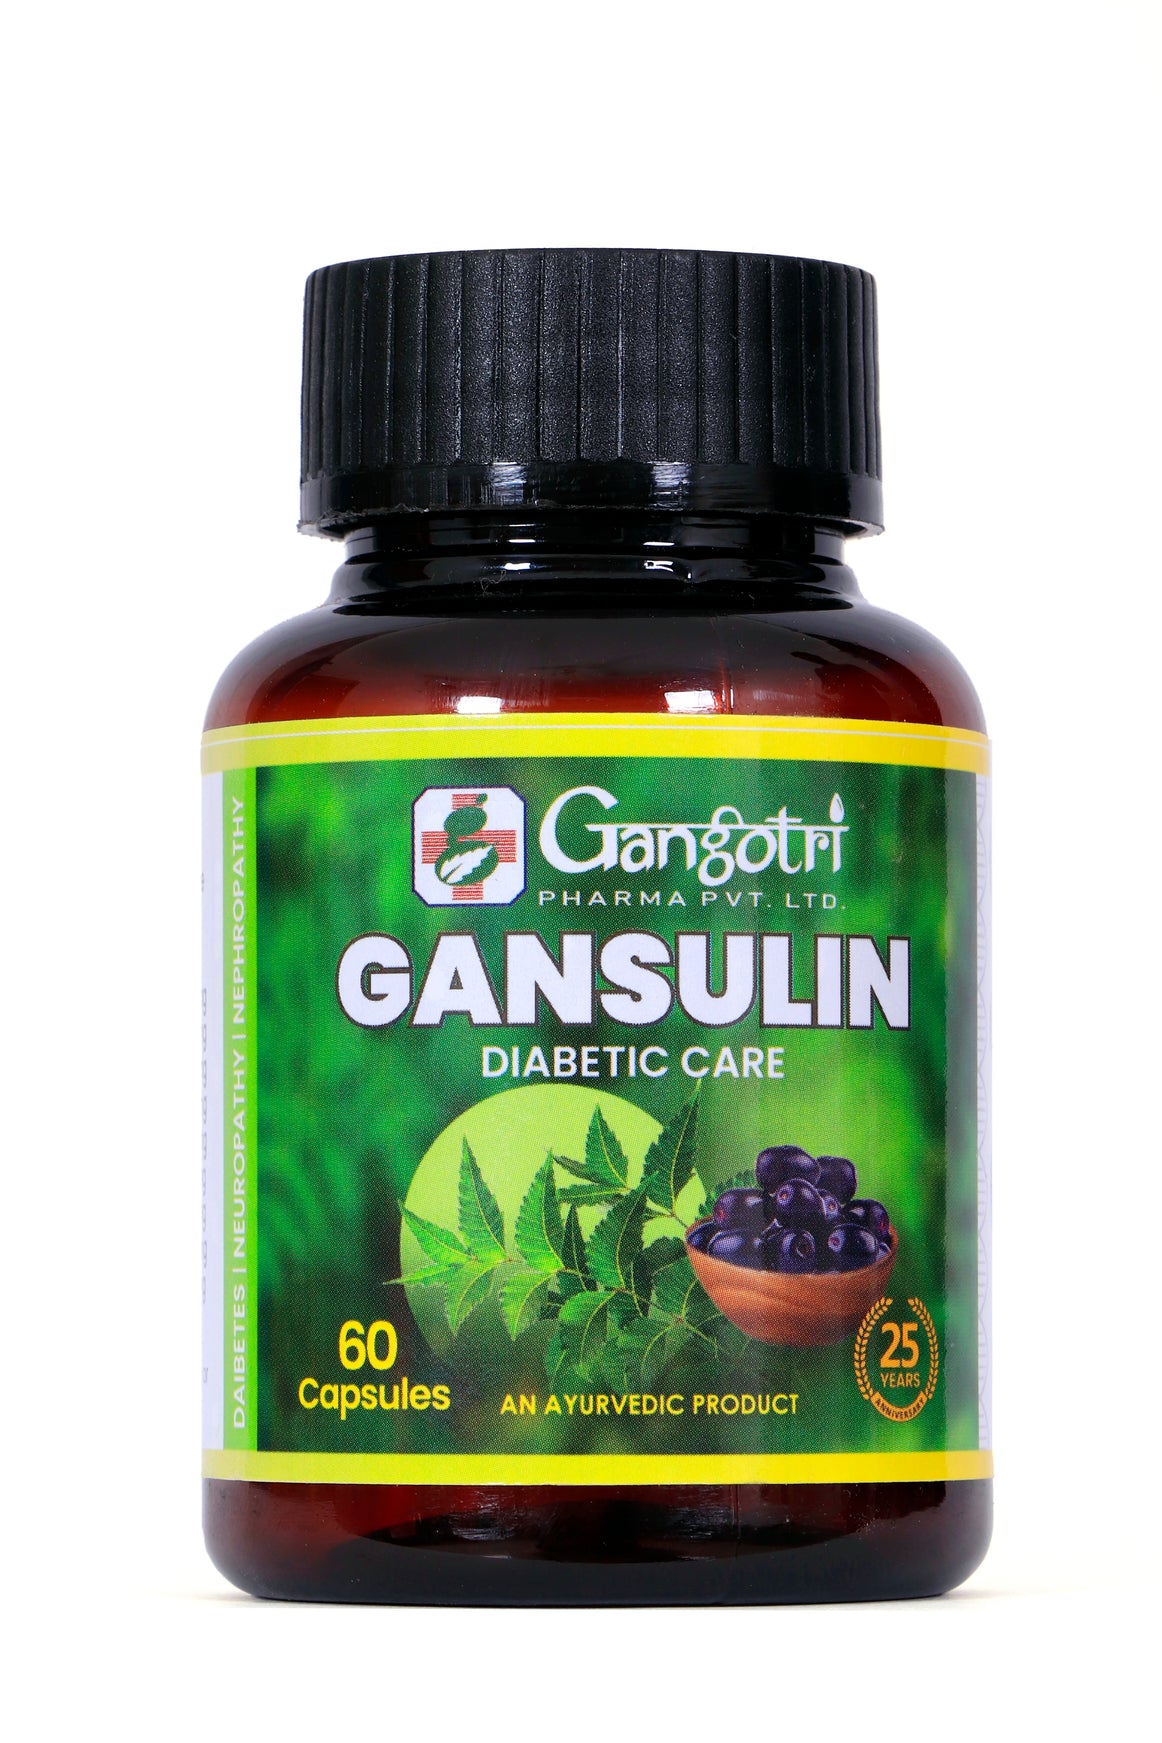 GANSULIN - Maintain Steady Blood Glucose Levels and Prevent Complications